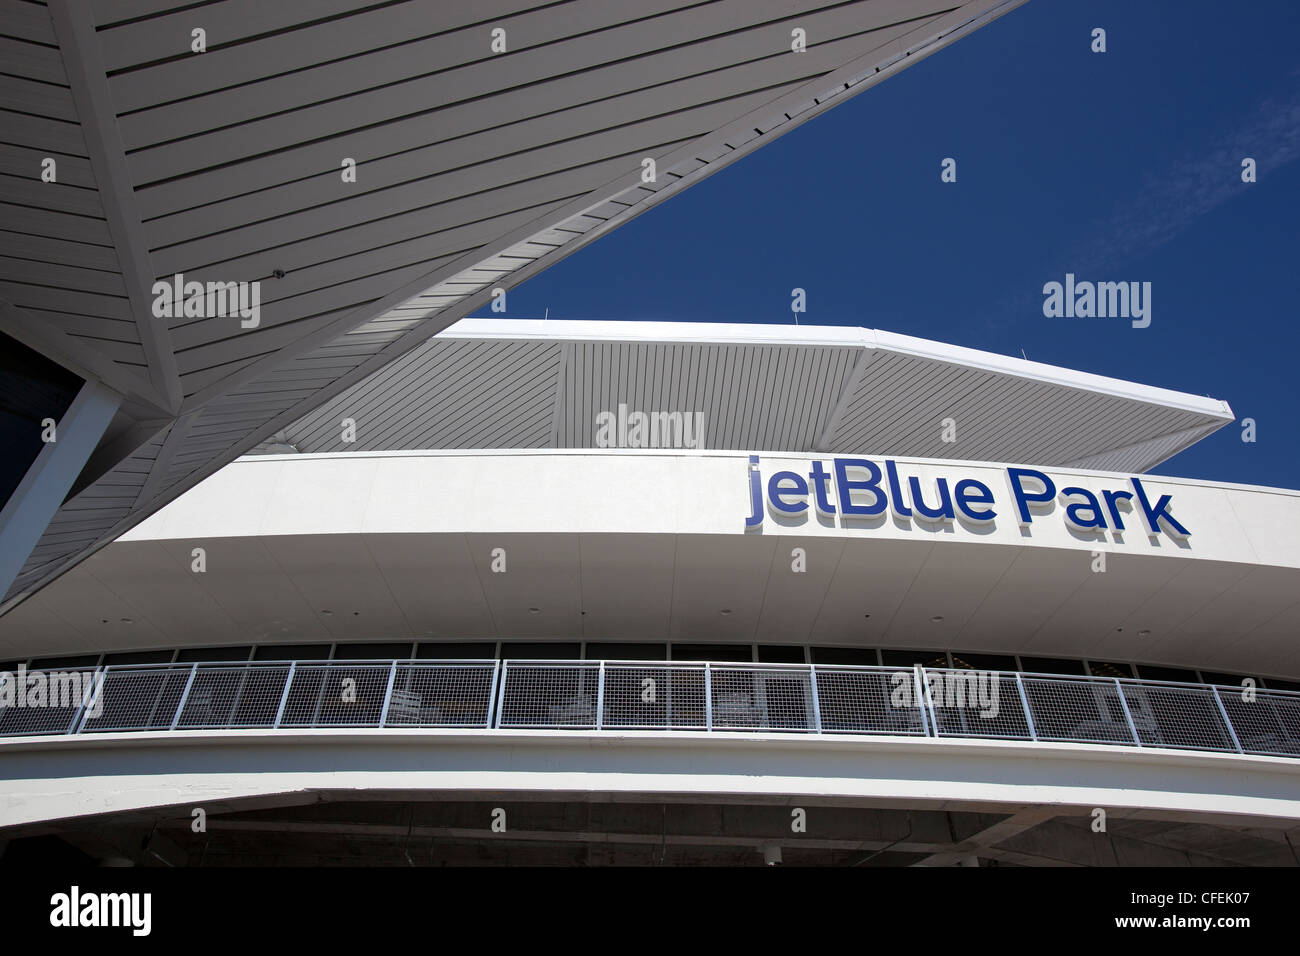 The Boston Red Sox's spring training camp at jetBlue Park in Fort Myers, Florida Stock Photo